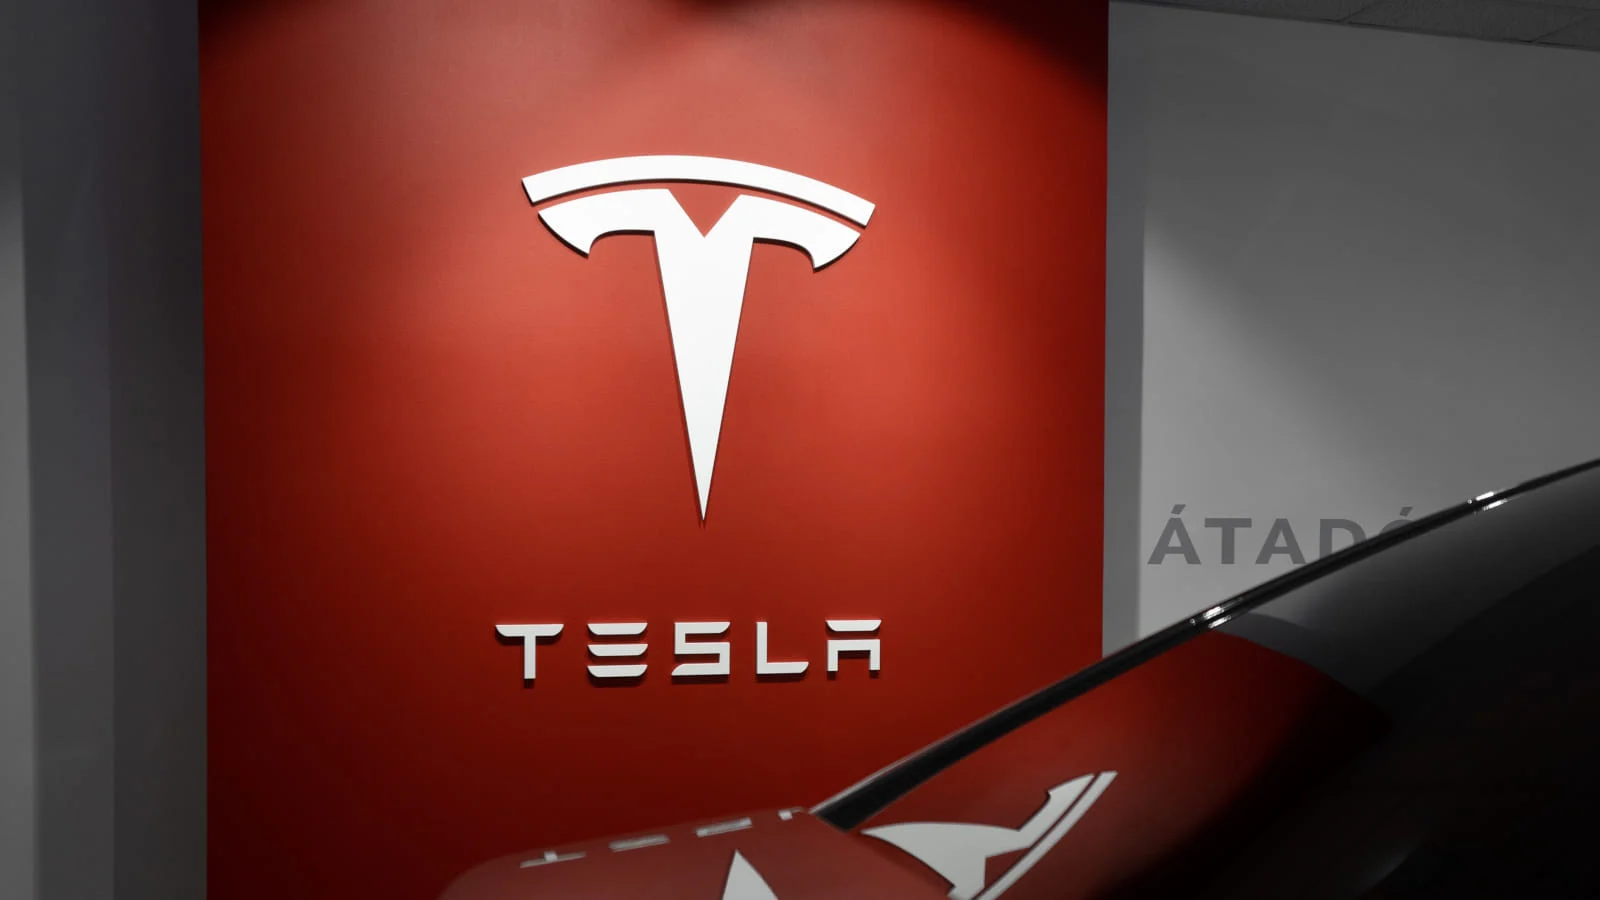 Tesla Faces Heat: A Closer Look at Workplace Fairness Claims